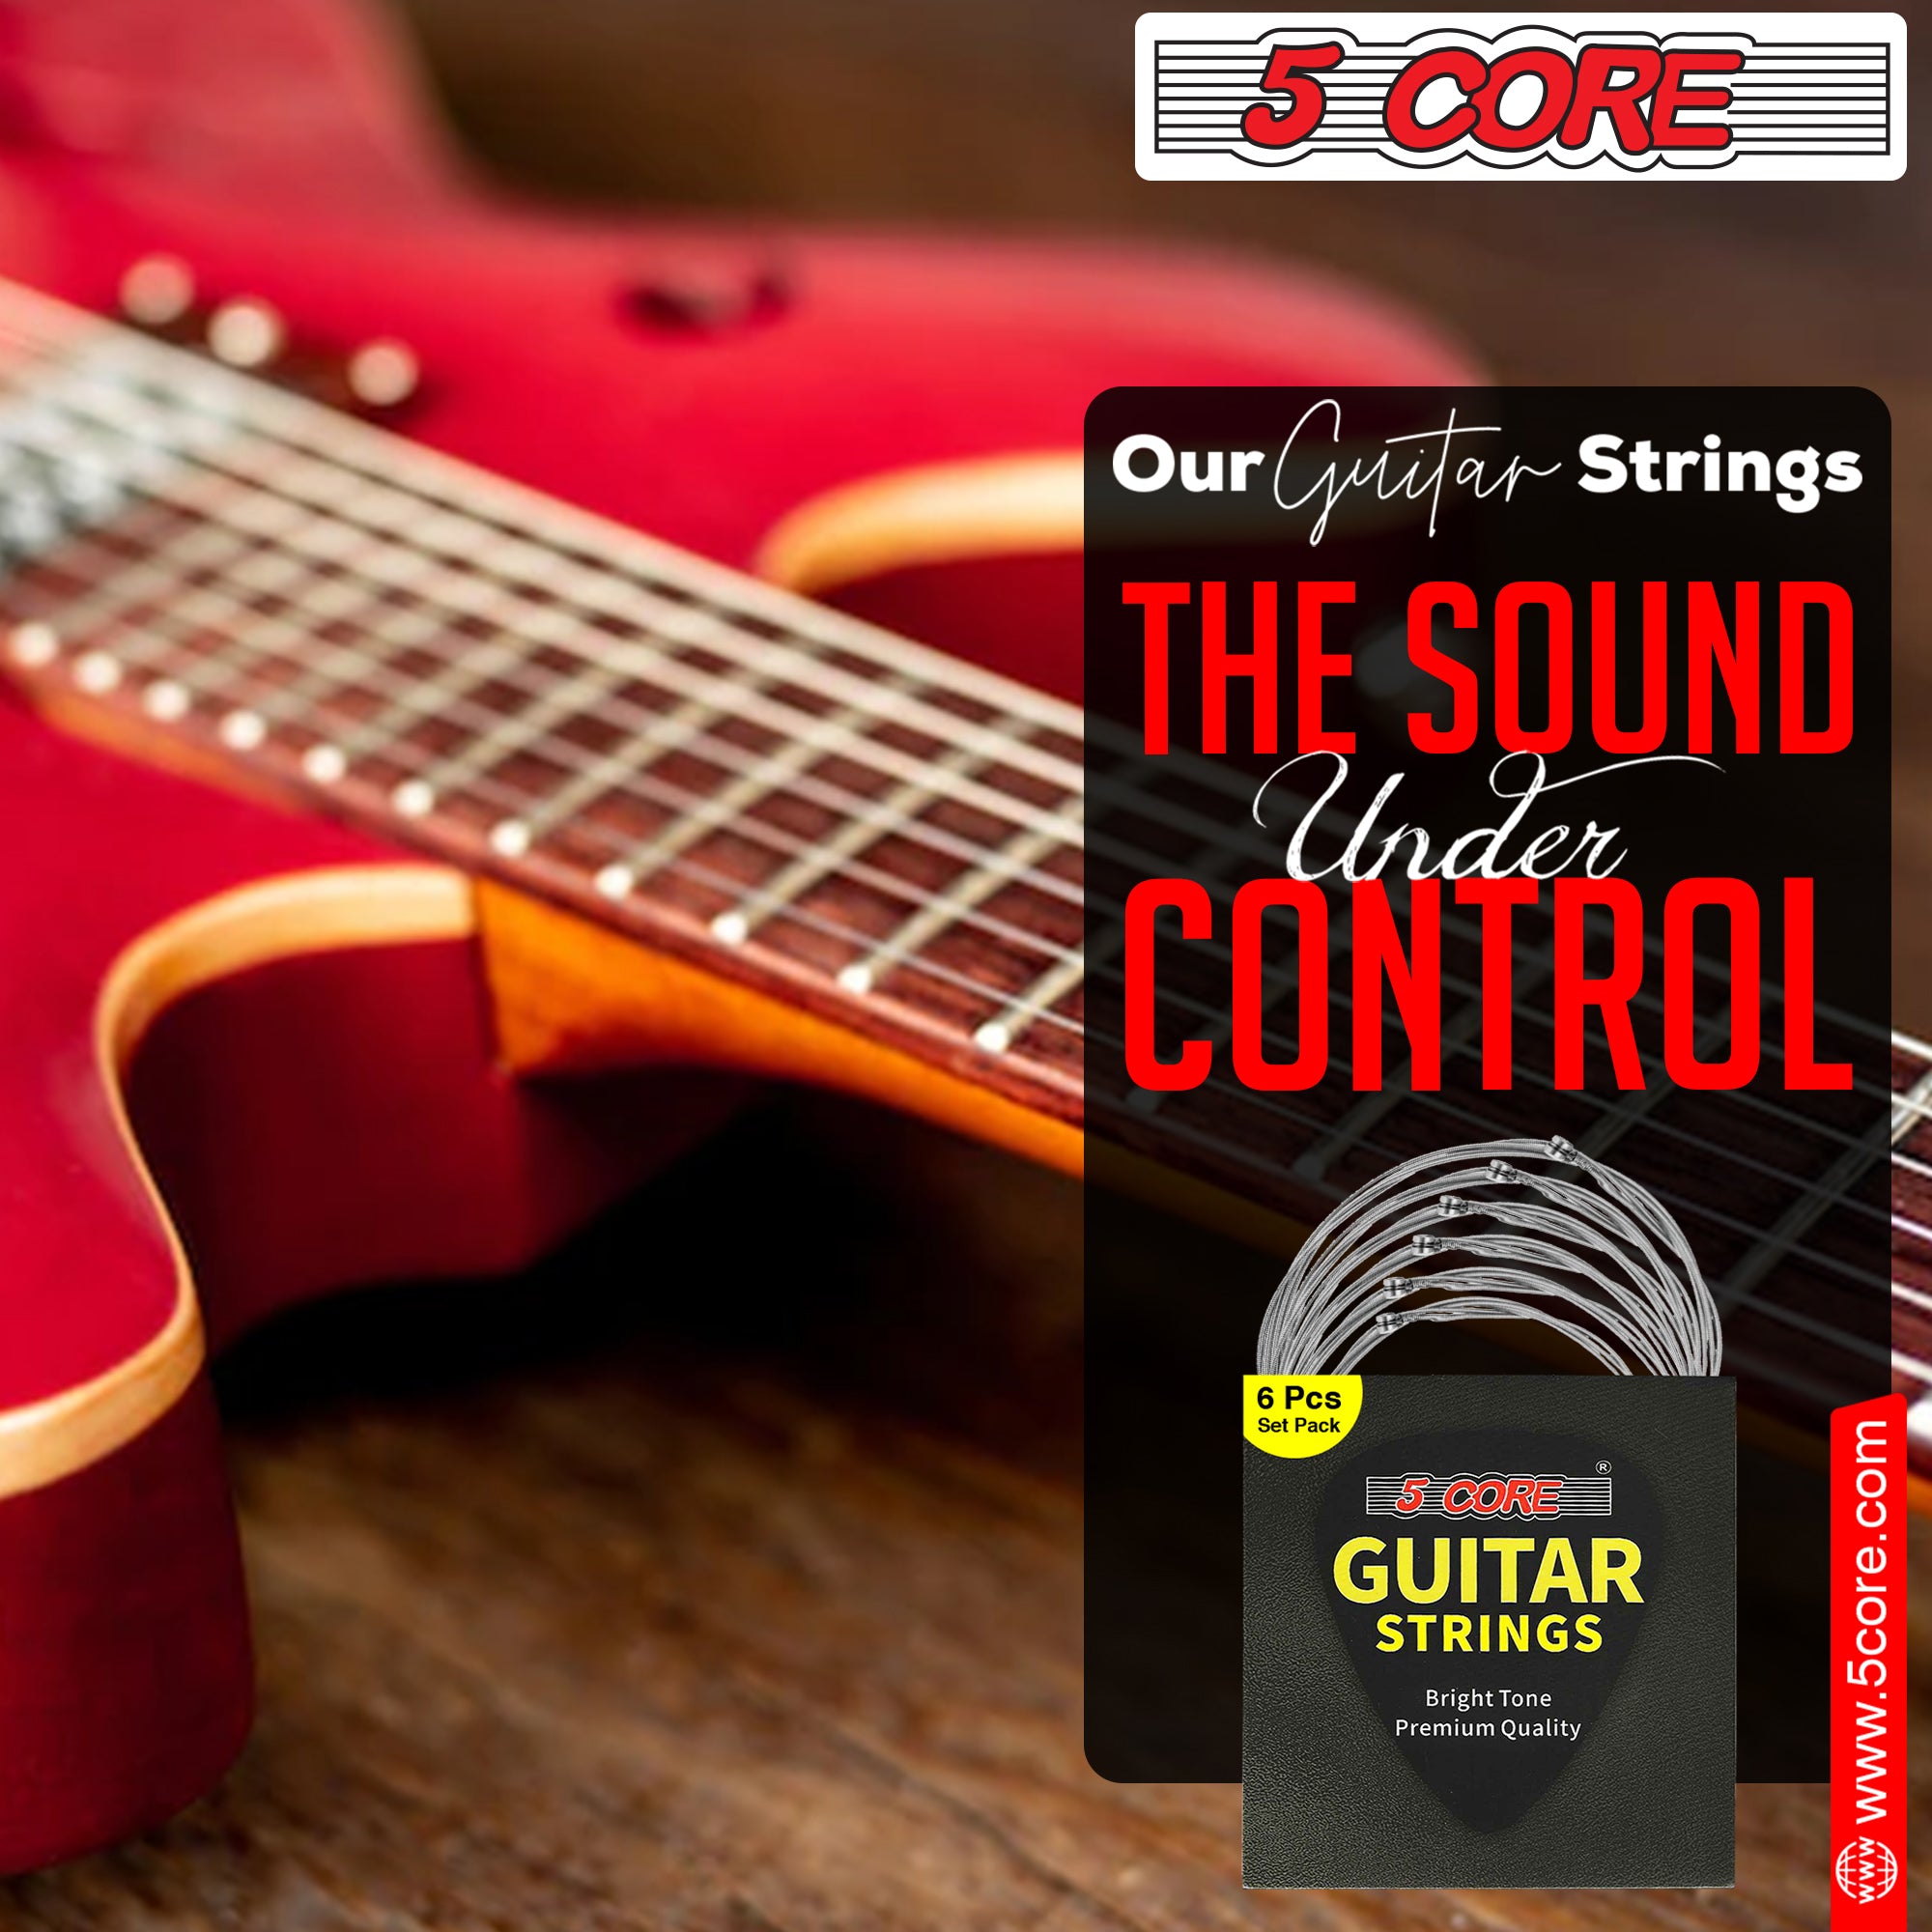 5 Core Electric Guitar Strings • 0.009-.042 Gauge w Deep Bright Tone for 6 String Electric Guitars